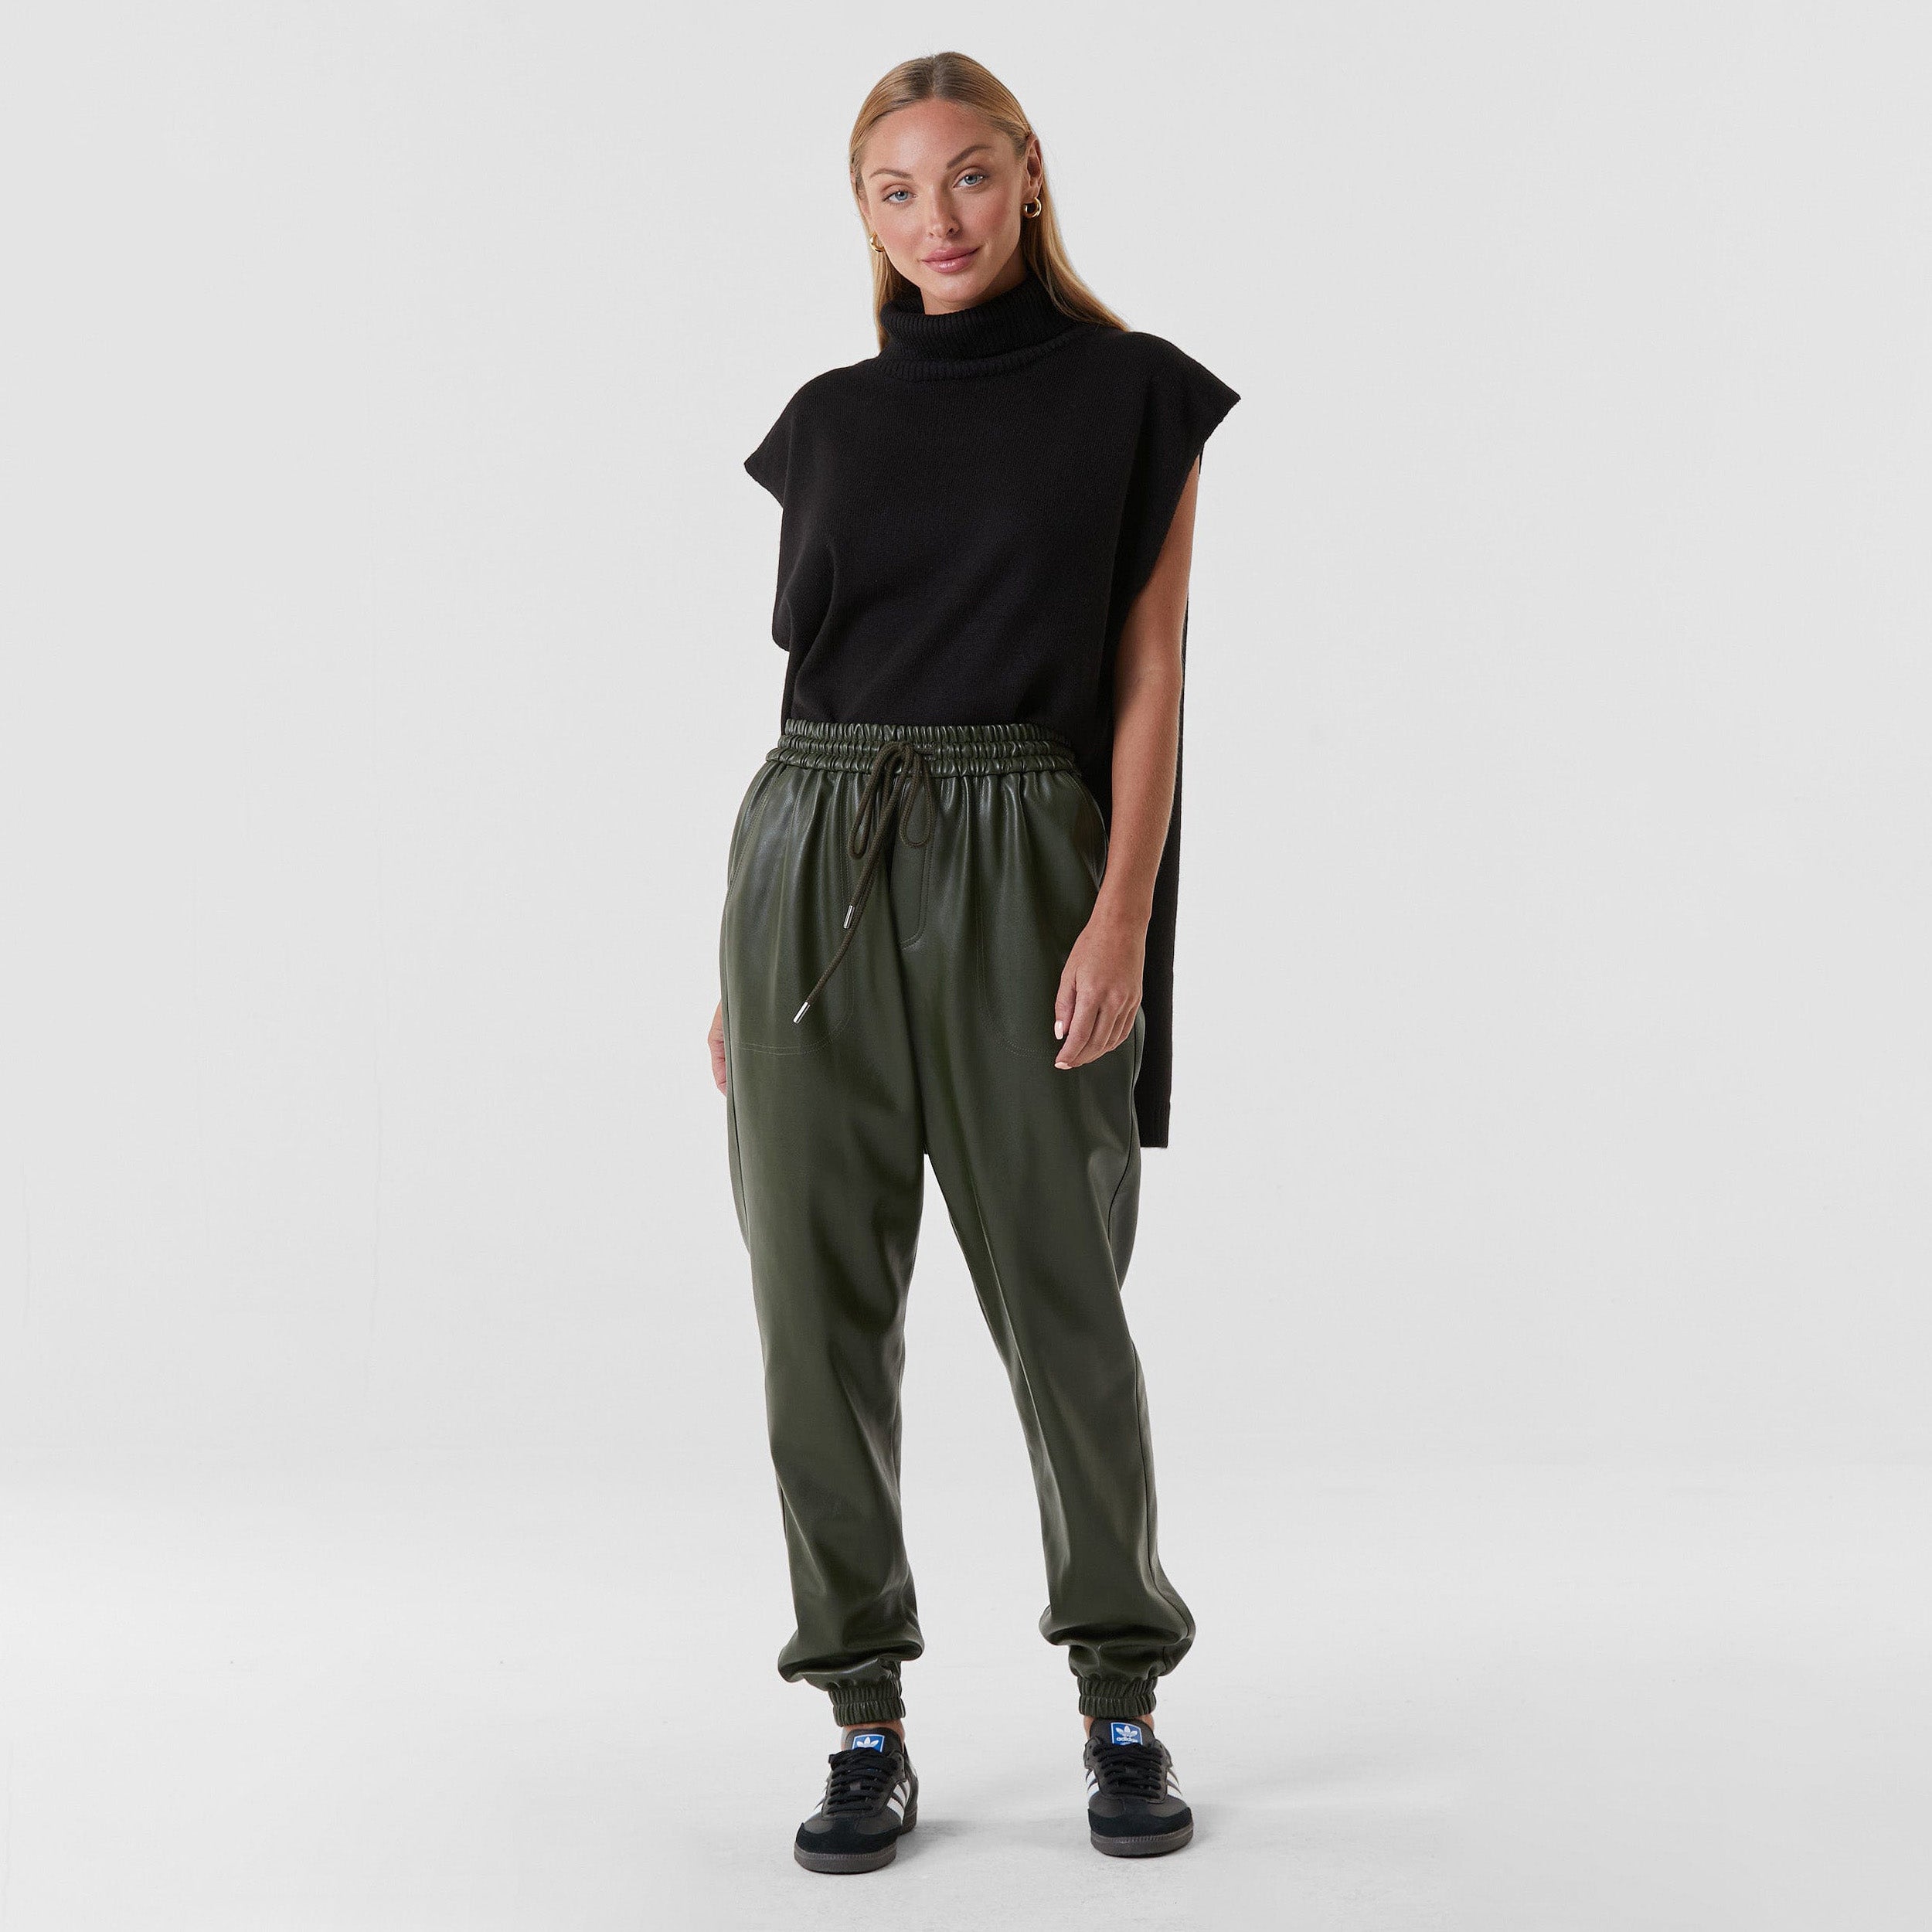 Full body view of woman wearing hunter green high rise faux leather jogger with drawstring waistband and cinched ankles with suede lining.